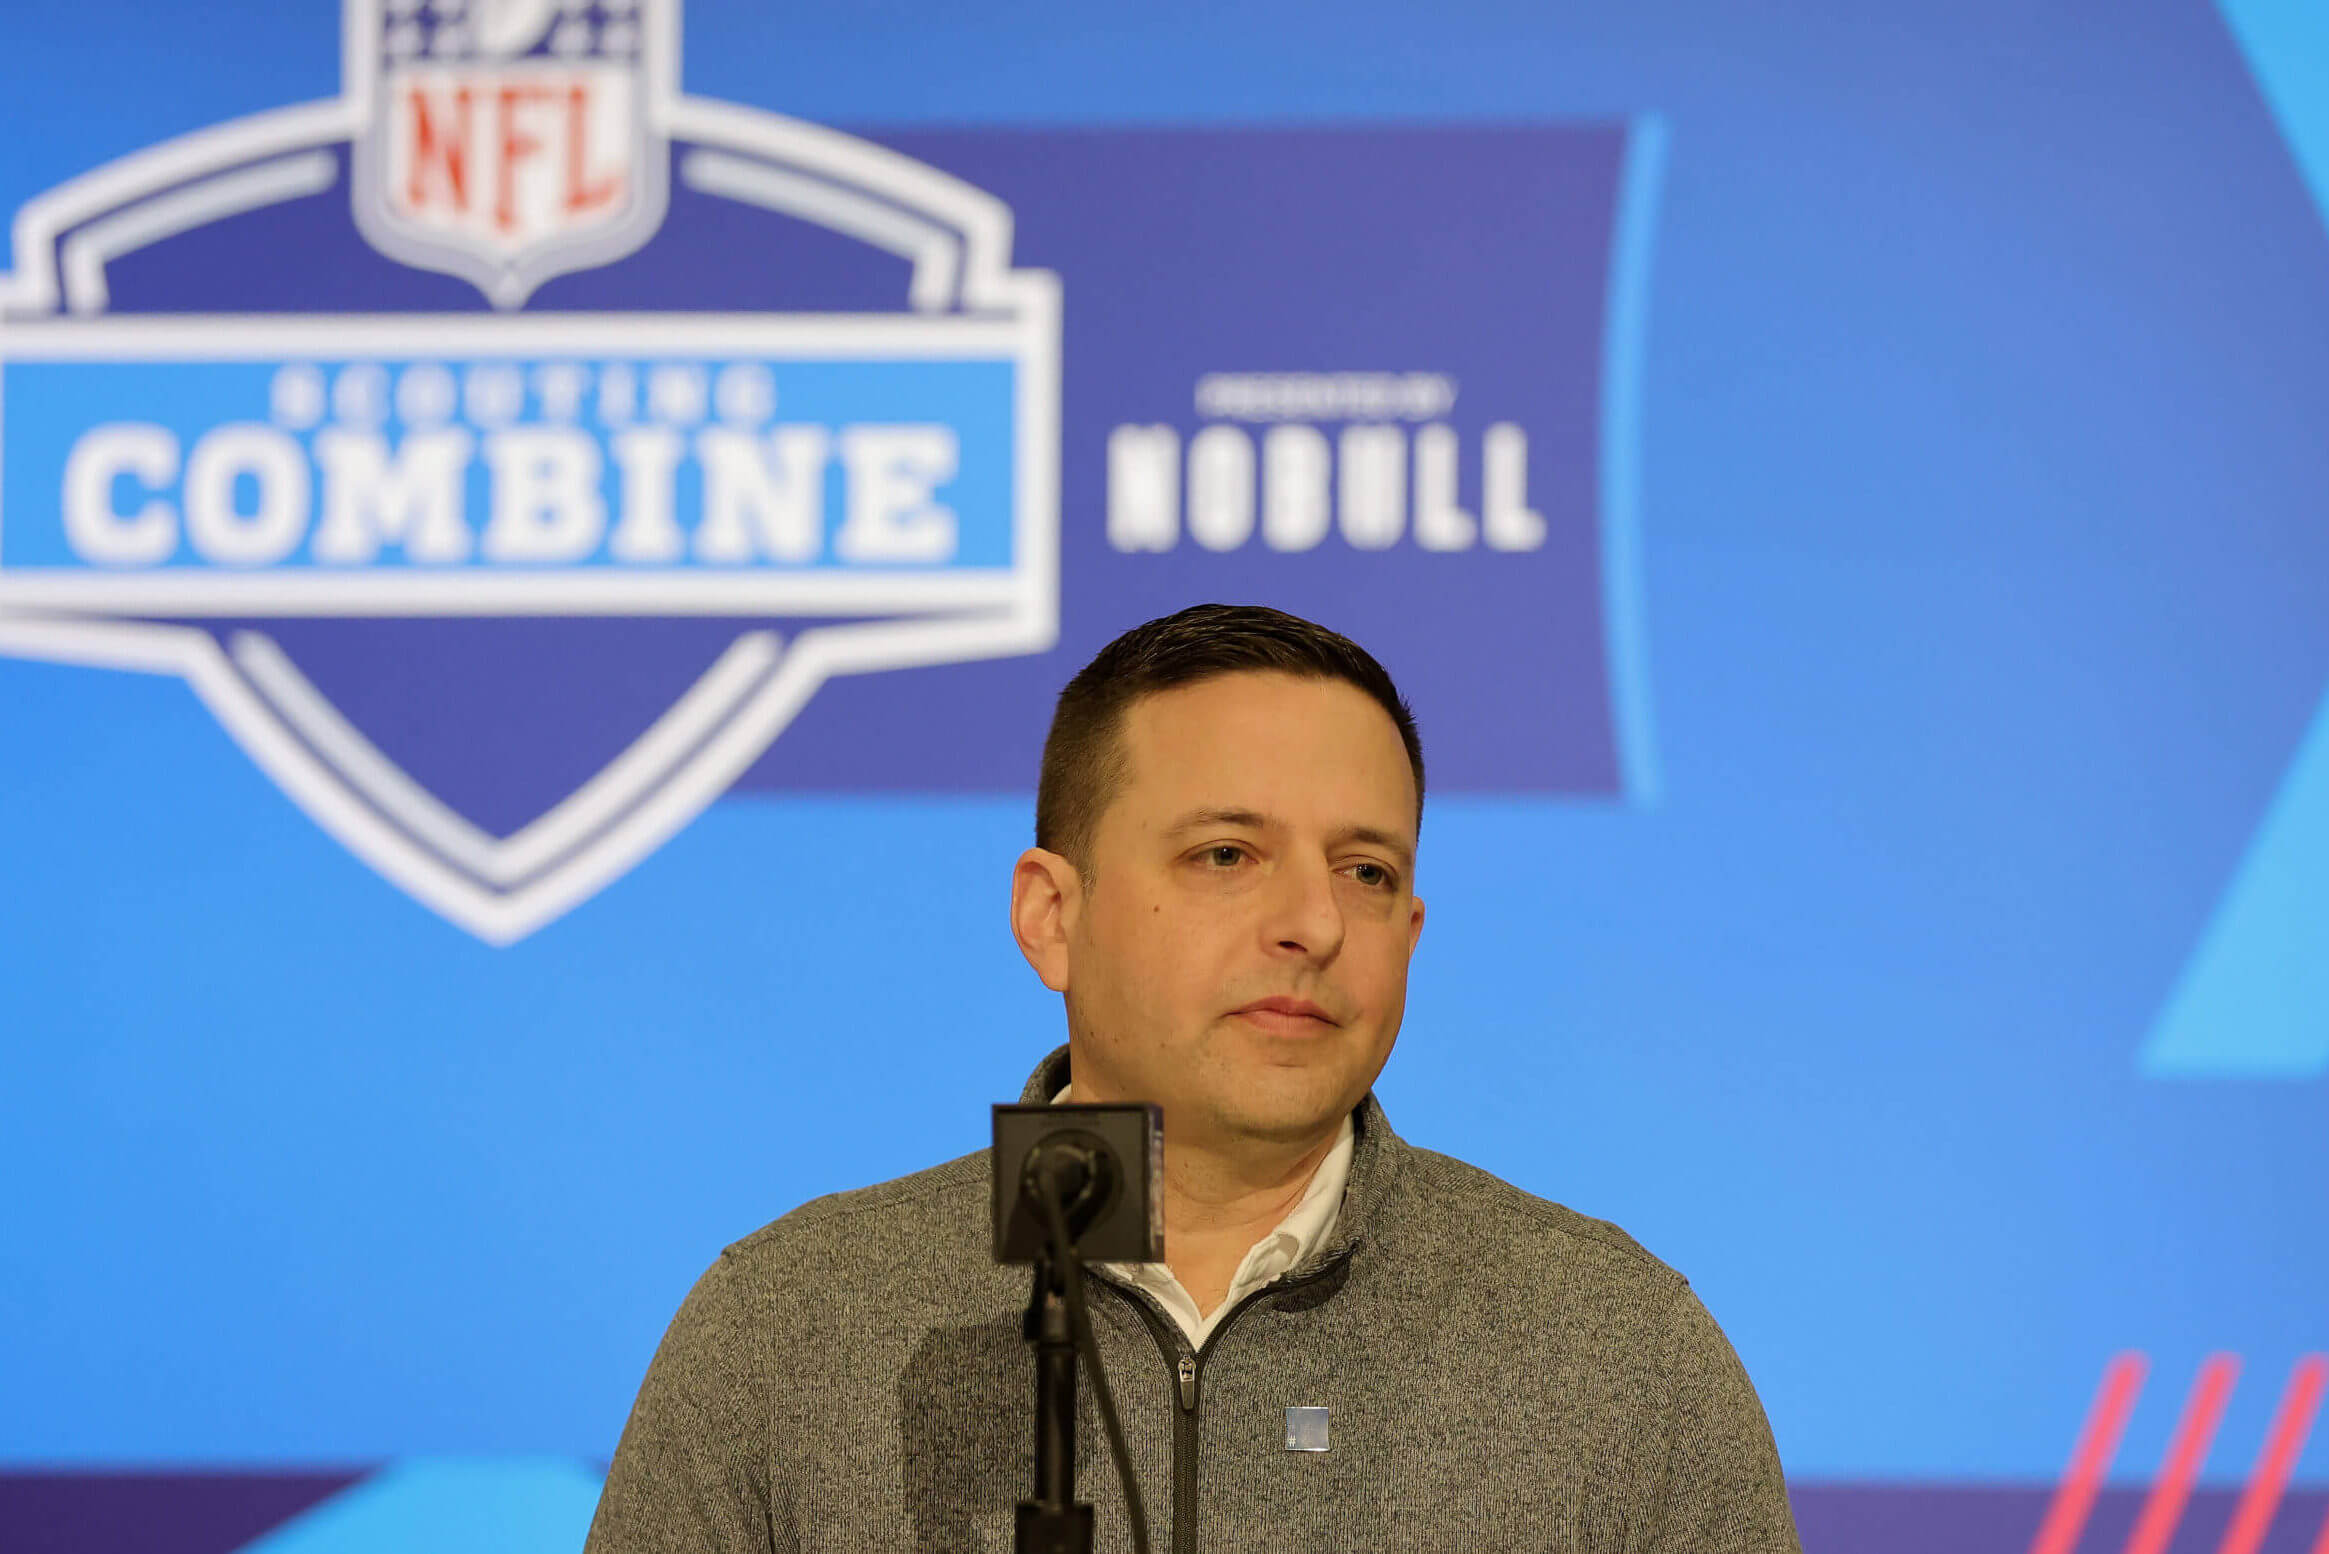 Has Eliot Wolf done enough to be named the Patriots’ GM? Decision looms for Robert Kraft